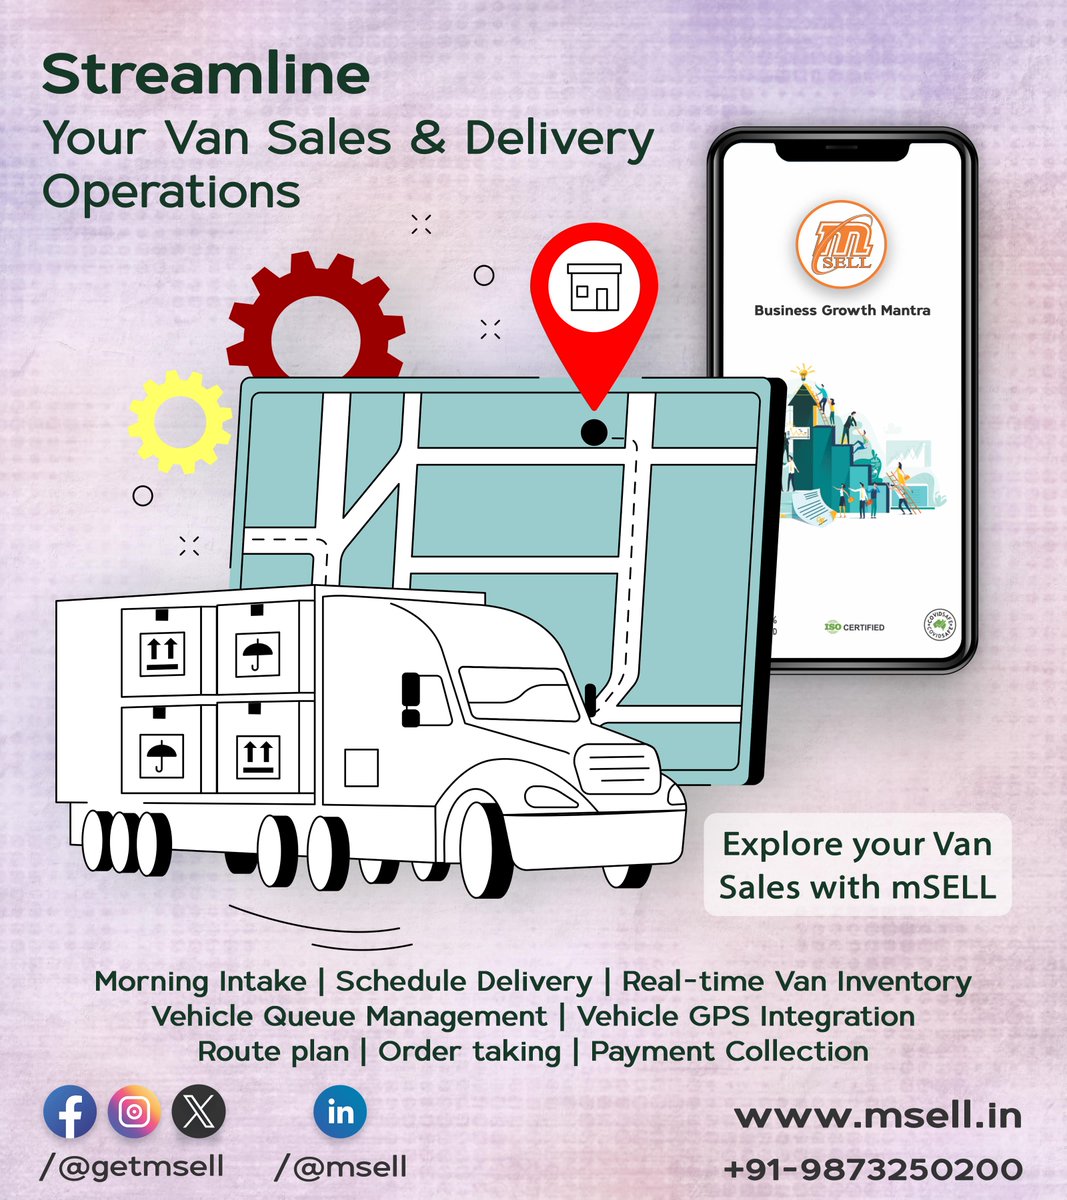 On-board your new customers in the field, sell, and bill on the spot. Automate your van sales with mSELL and grow with ease.

Have any queries? Contact us directly @ +91 9873250200

#vansales #salesforceautomation #saas #india #msmes #fmcgindustry #beverageindustry #fmcg #cpg